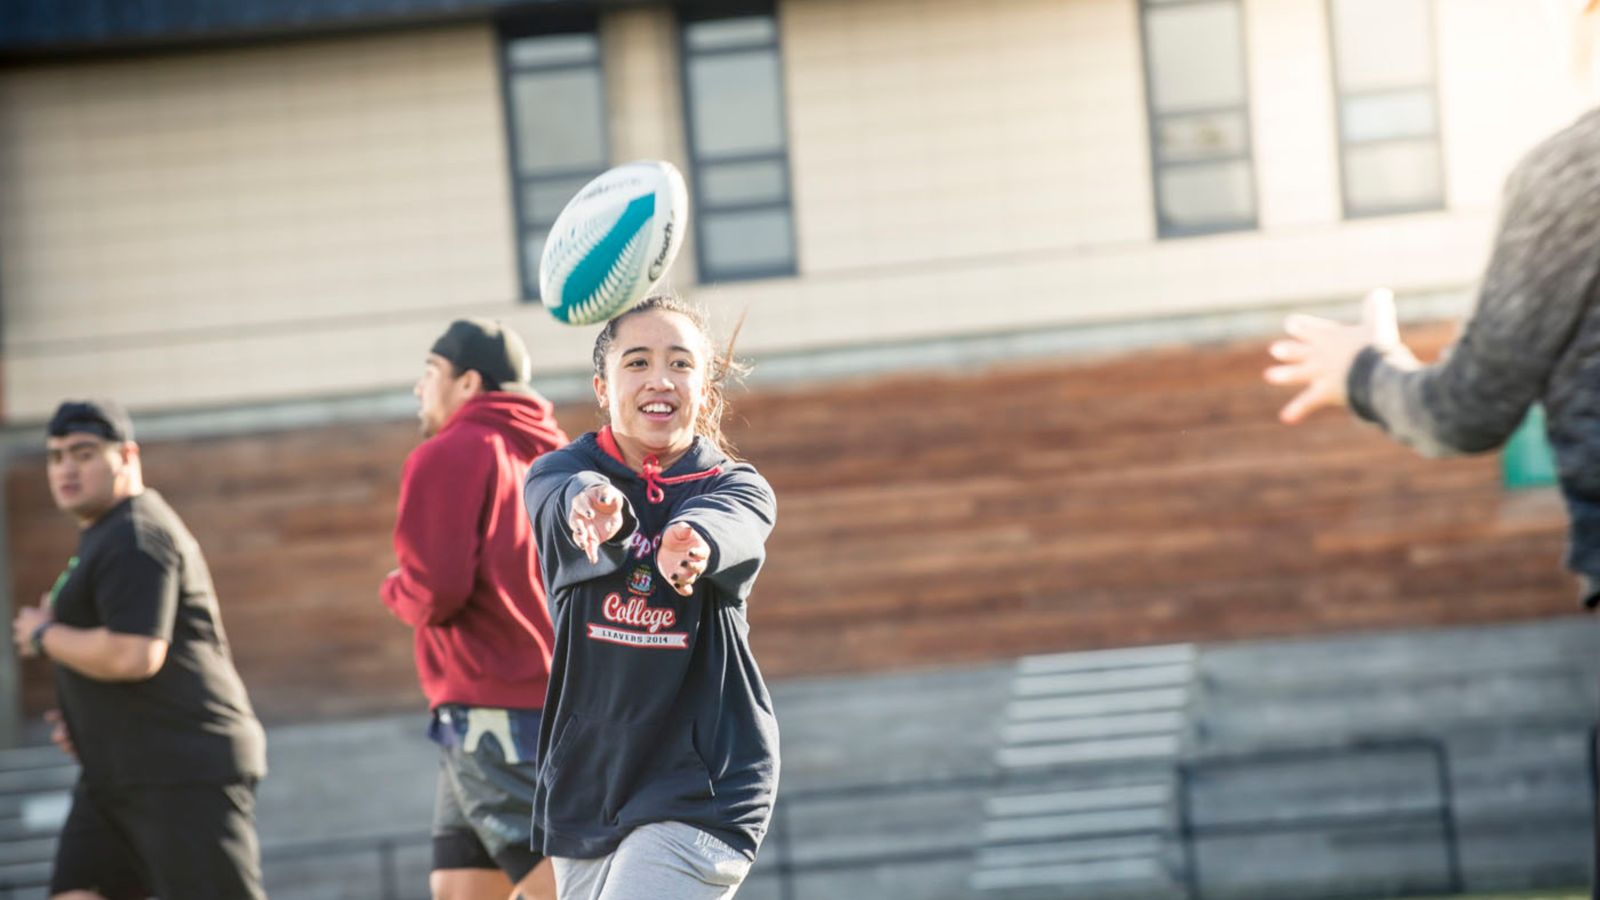 Action shot of female student throwing rugby ball. 